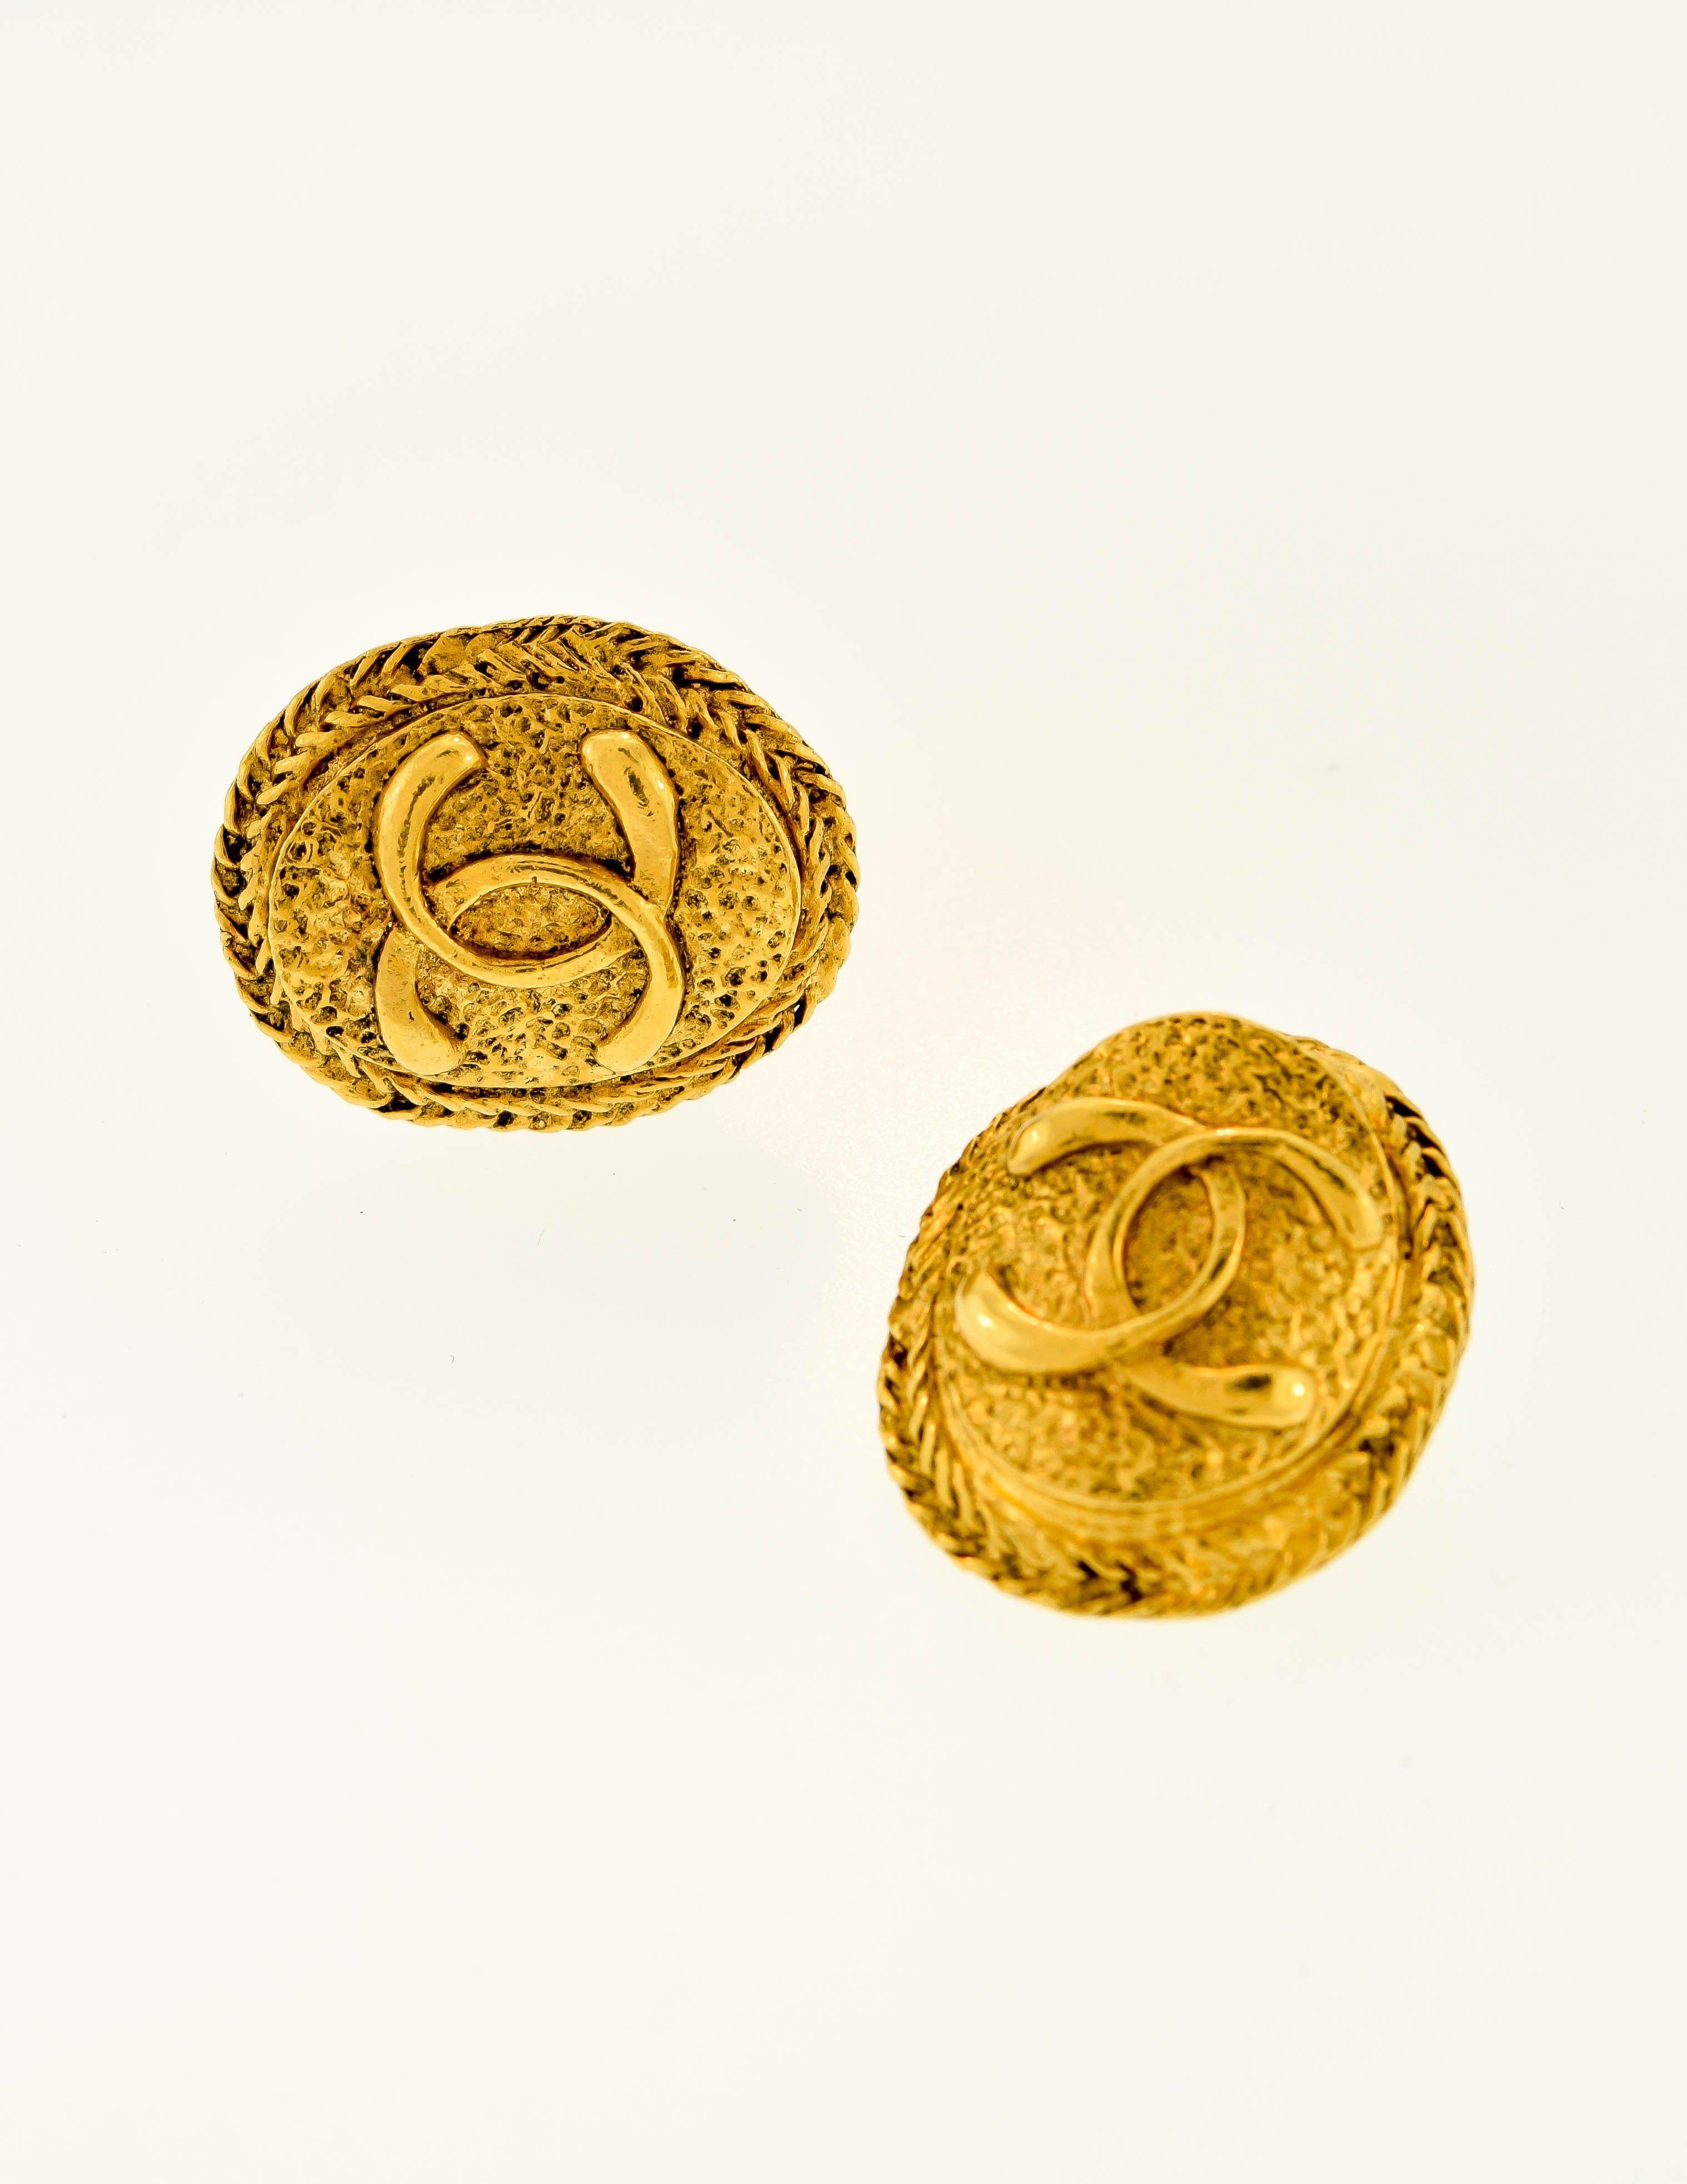 Chanel Vintage Logo - Chanel Vintage Gold Textured CC Logo Oval Framed Earrings - from ...